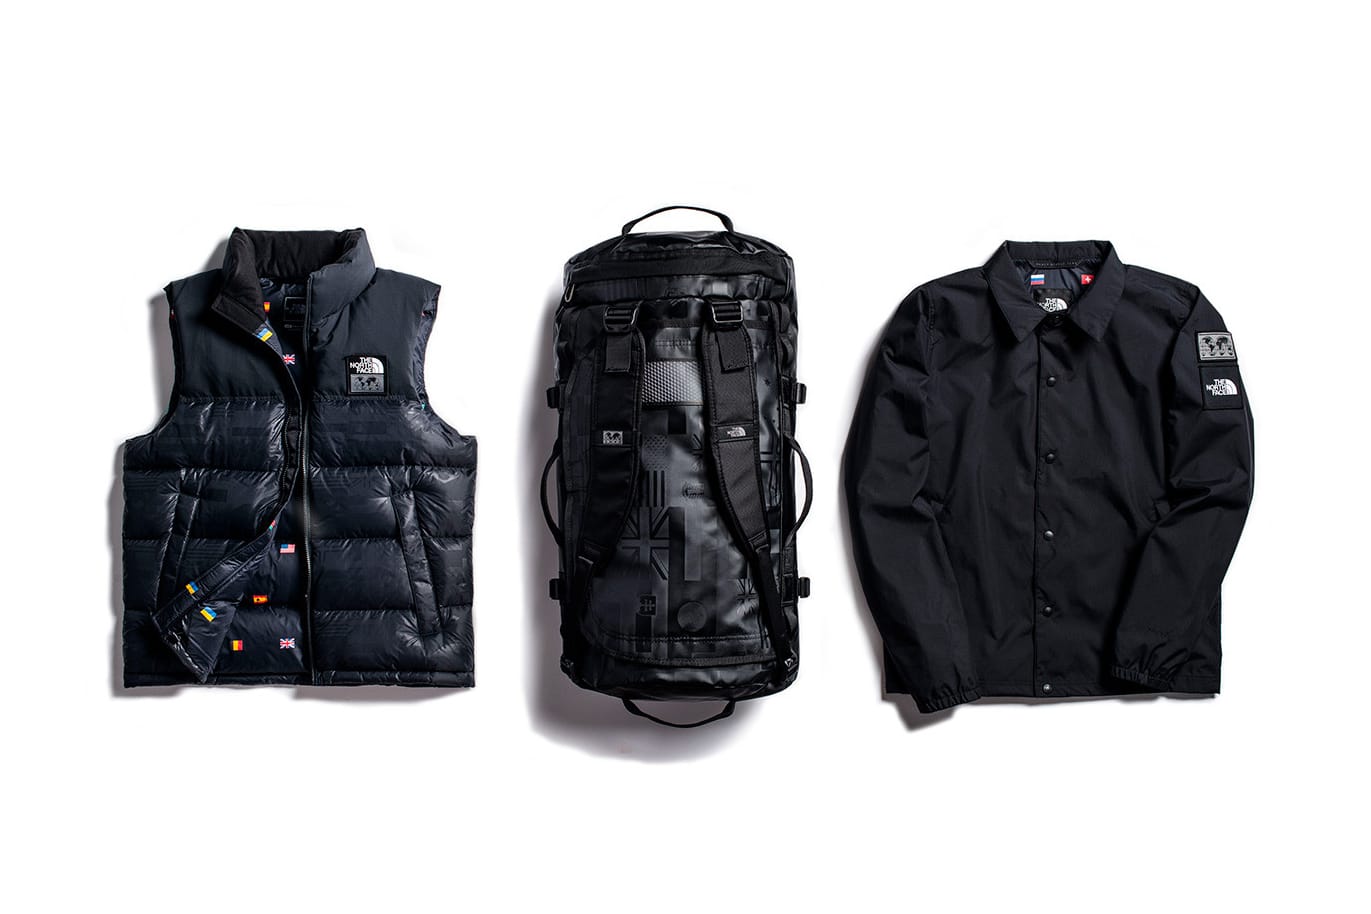 the north face international collection